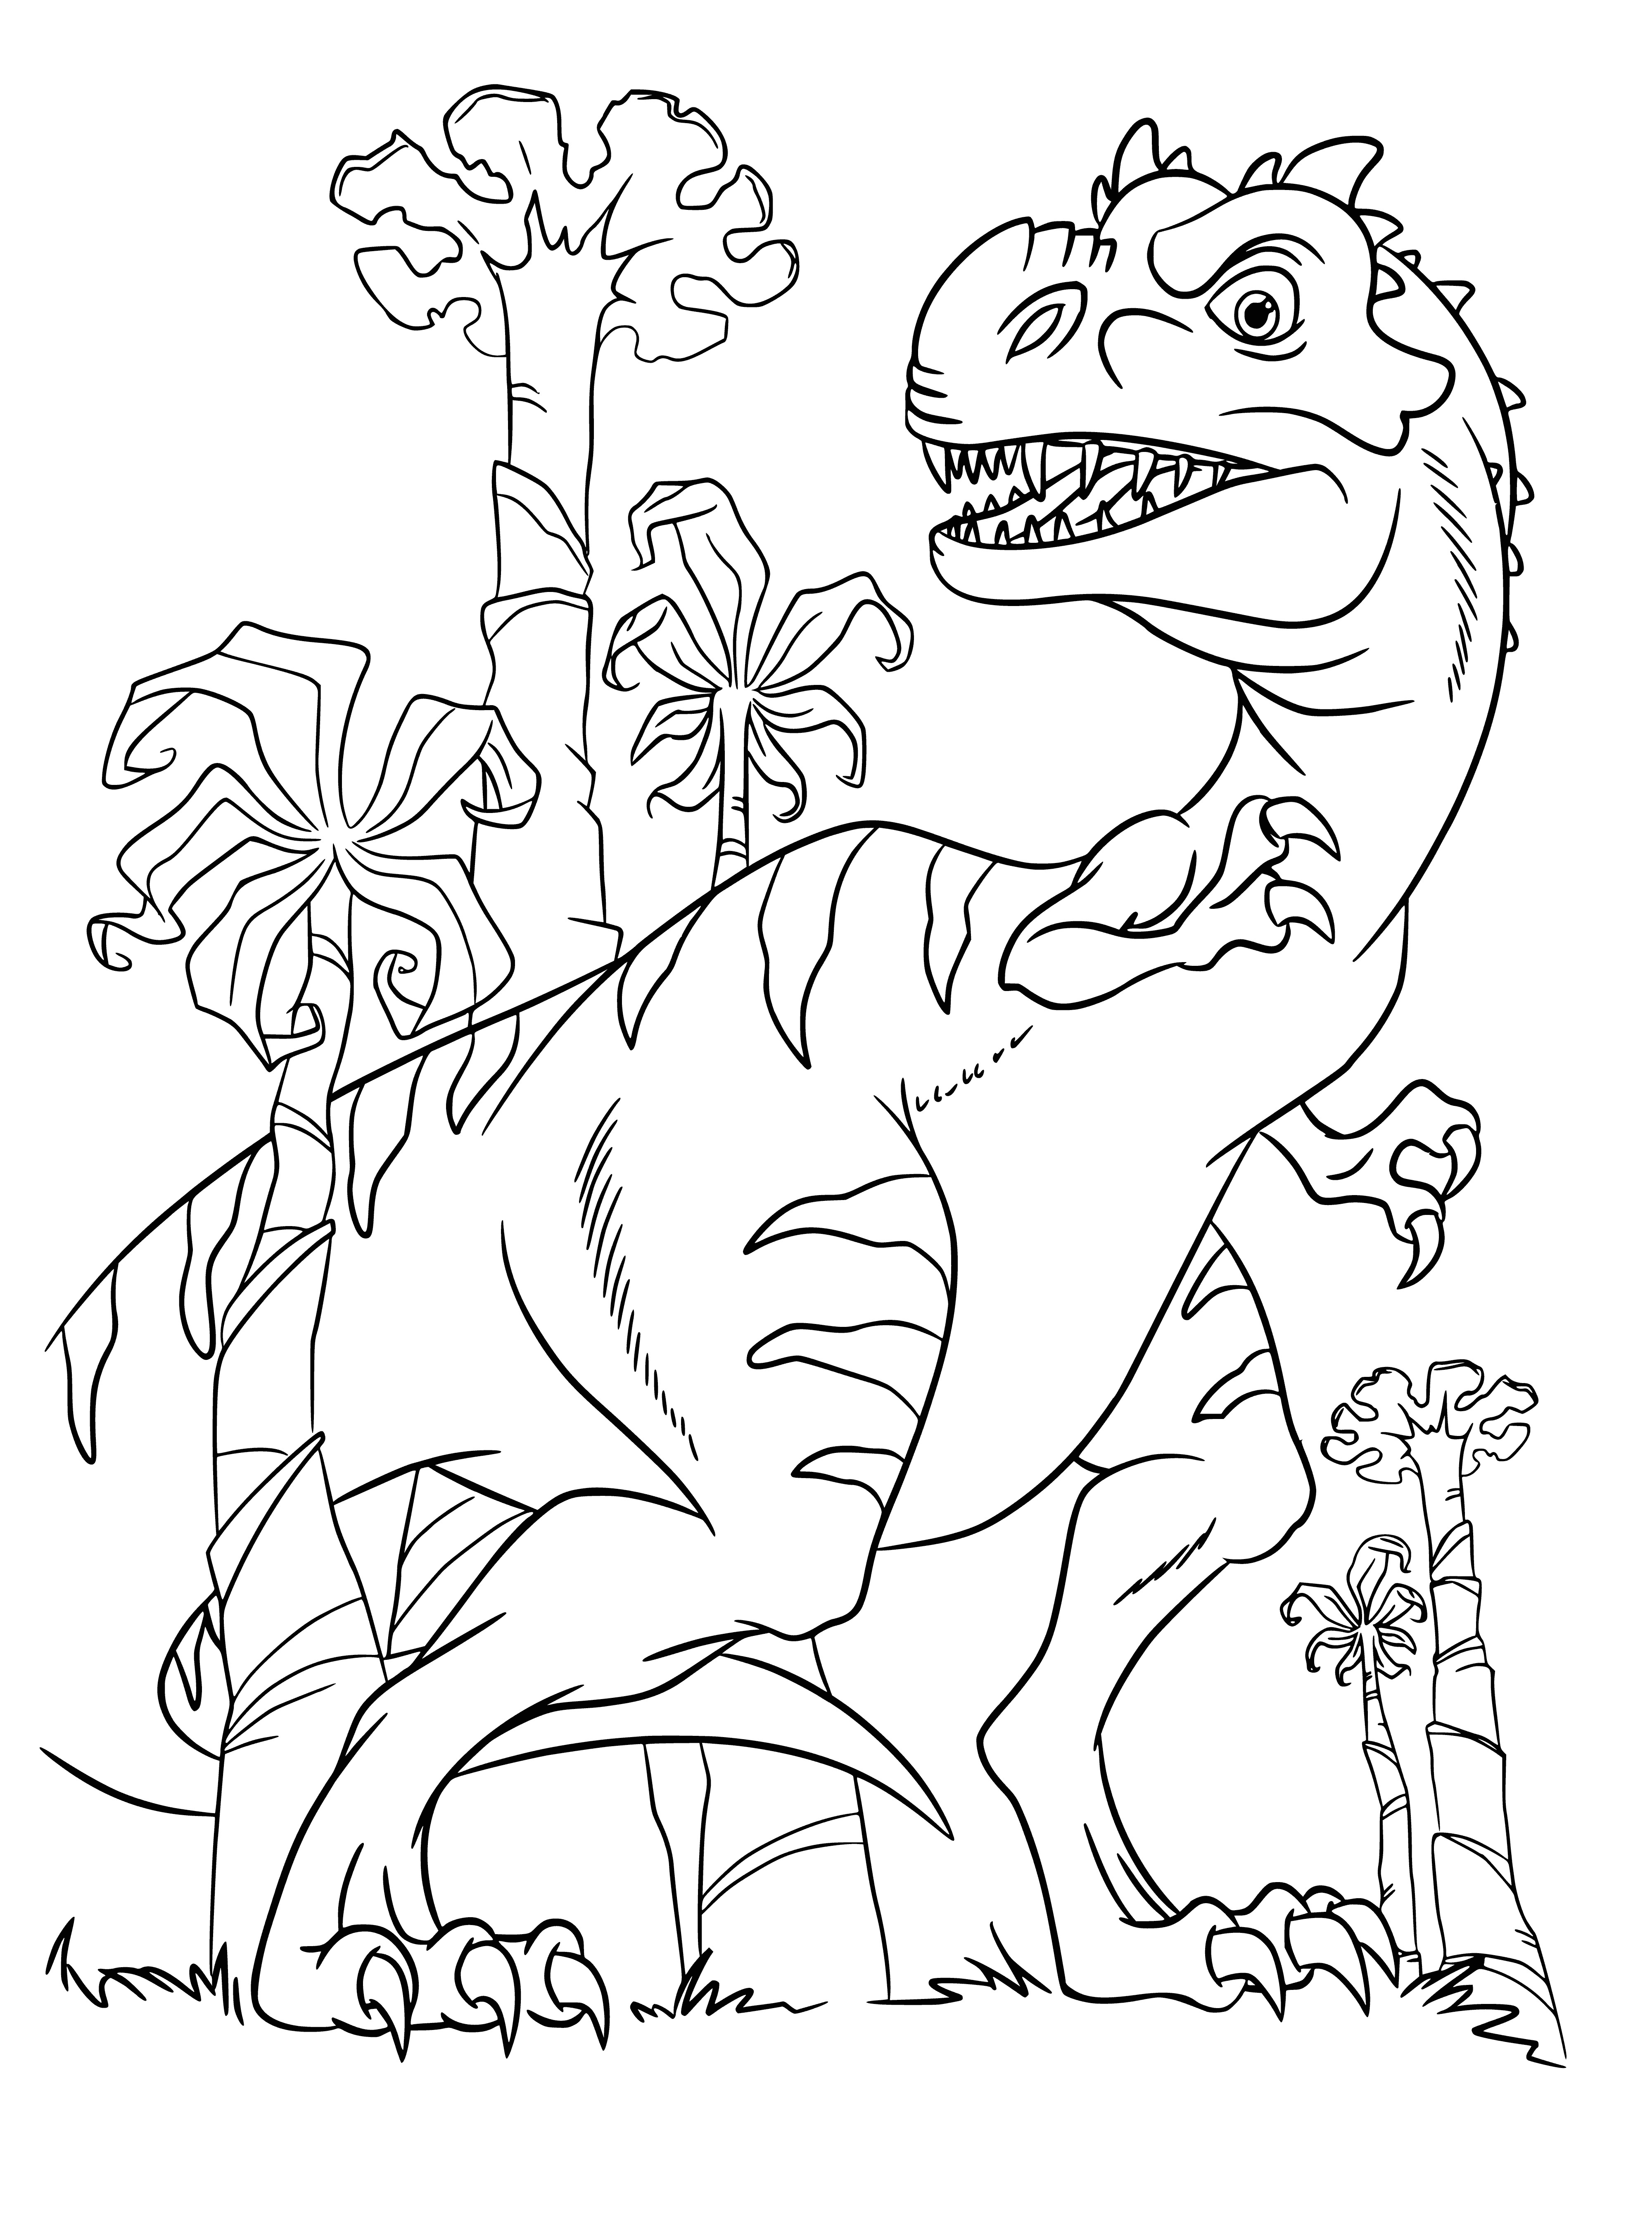 coloring page: Large dinosaur with green/brown scales stands in forest, surrounded by smaller dinosaurs. Long neck & tail, sharp teeth. #Dinosaurs